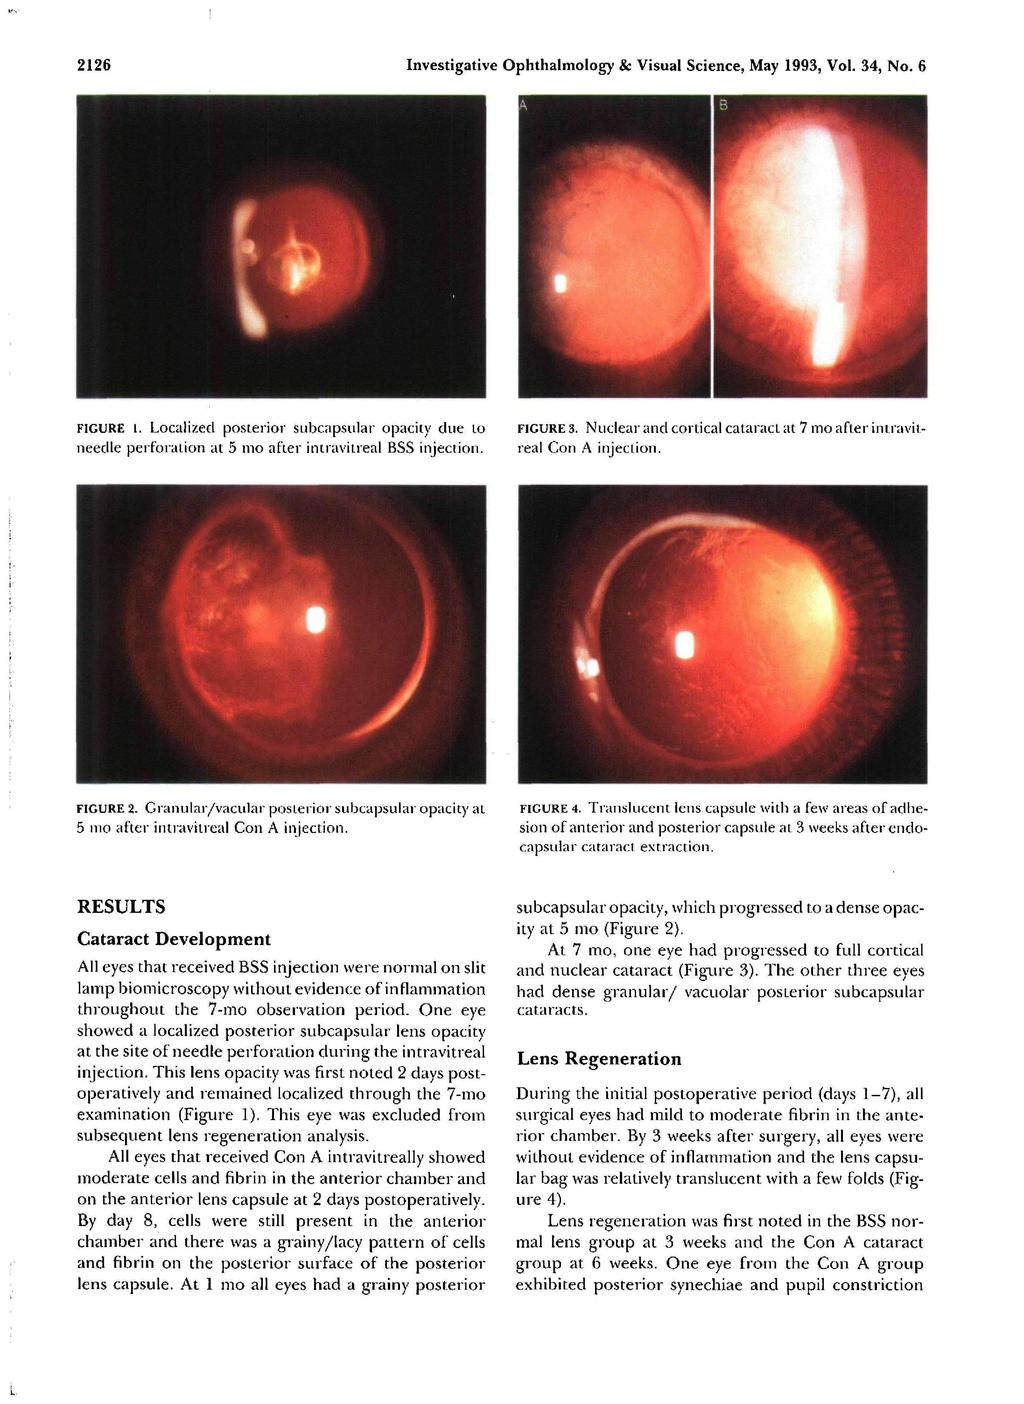 2126 Investigative Ophthalmology & Visual Science, May 1993, Vol. 34, No. 6 FIGURE 1. Localized posterior subcapsular opacity due to needle perforation at 5 mo after intravitreal BSS injection.